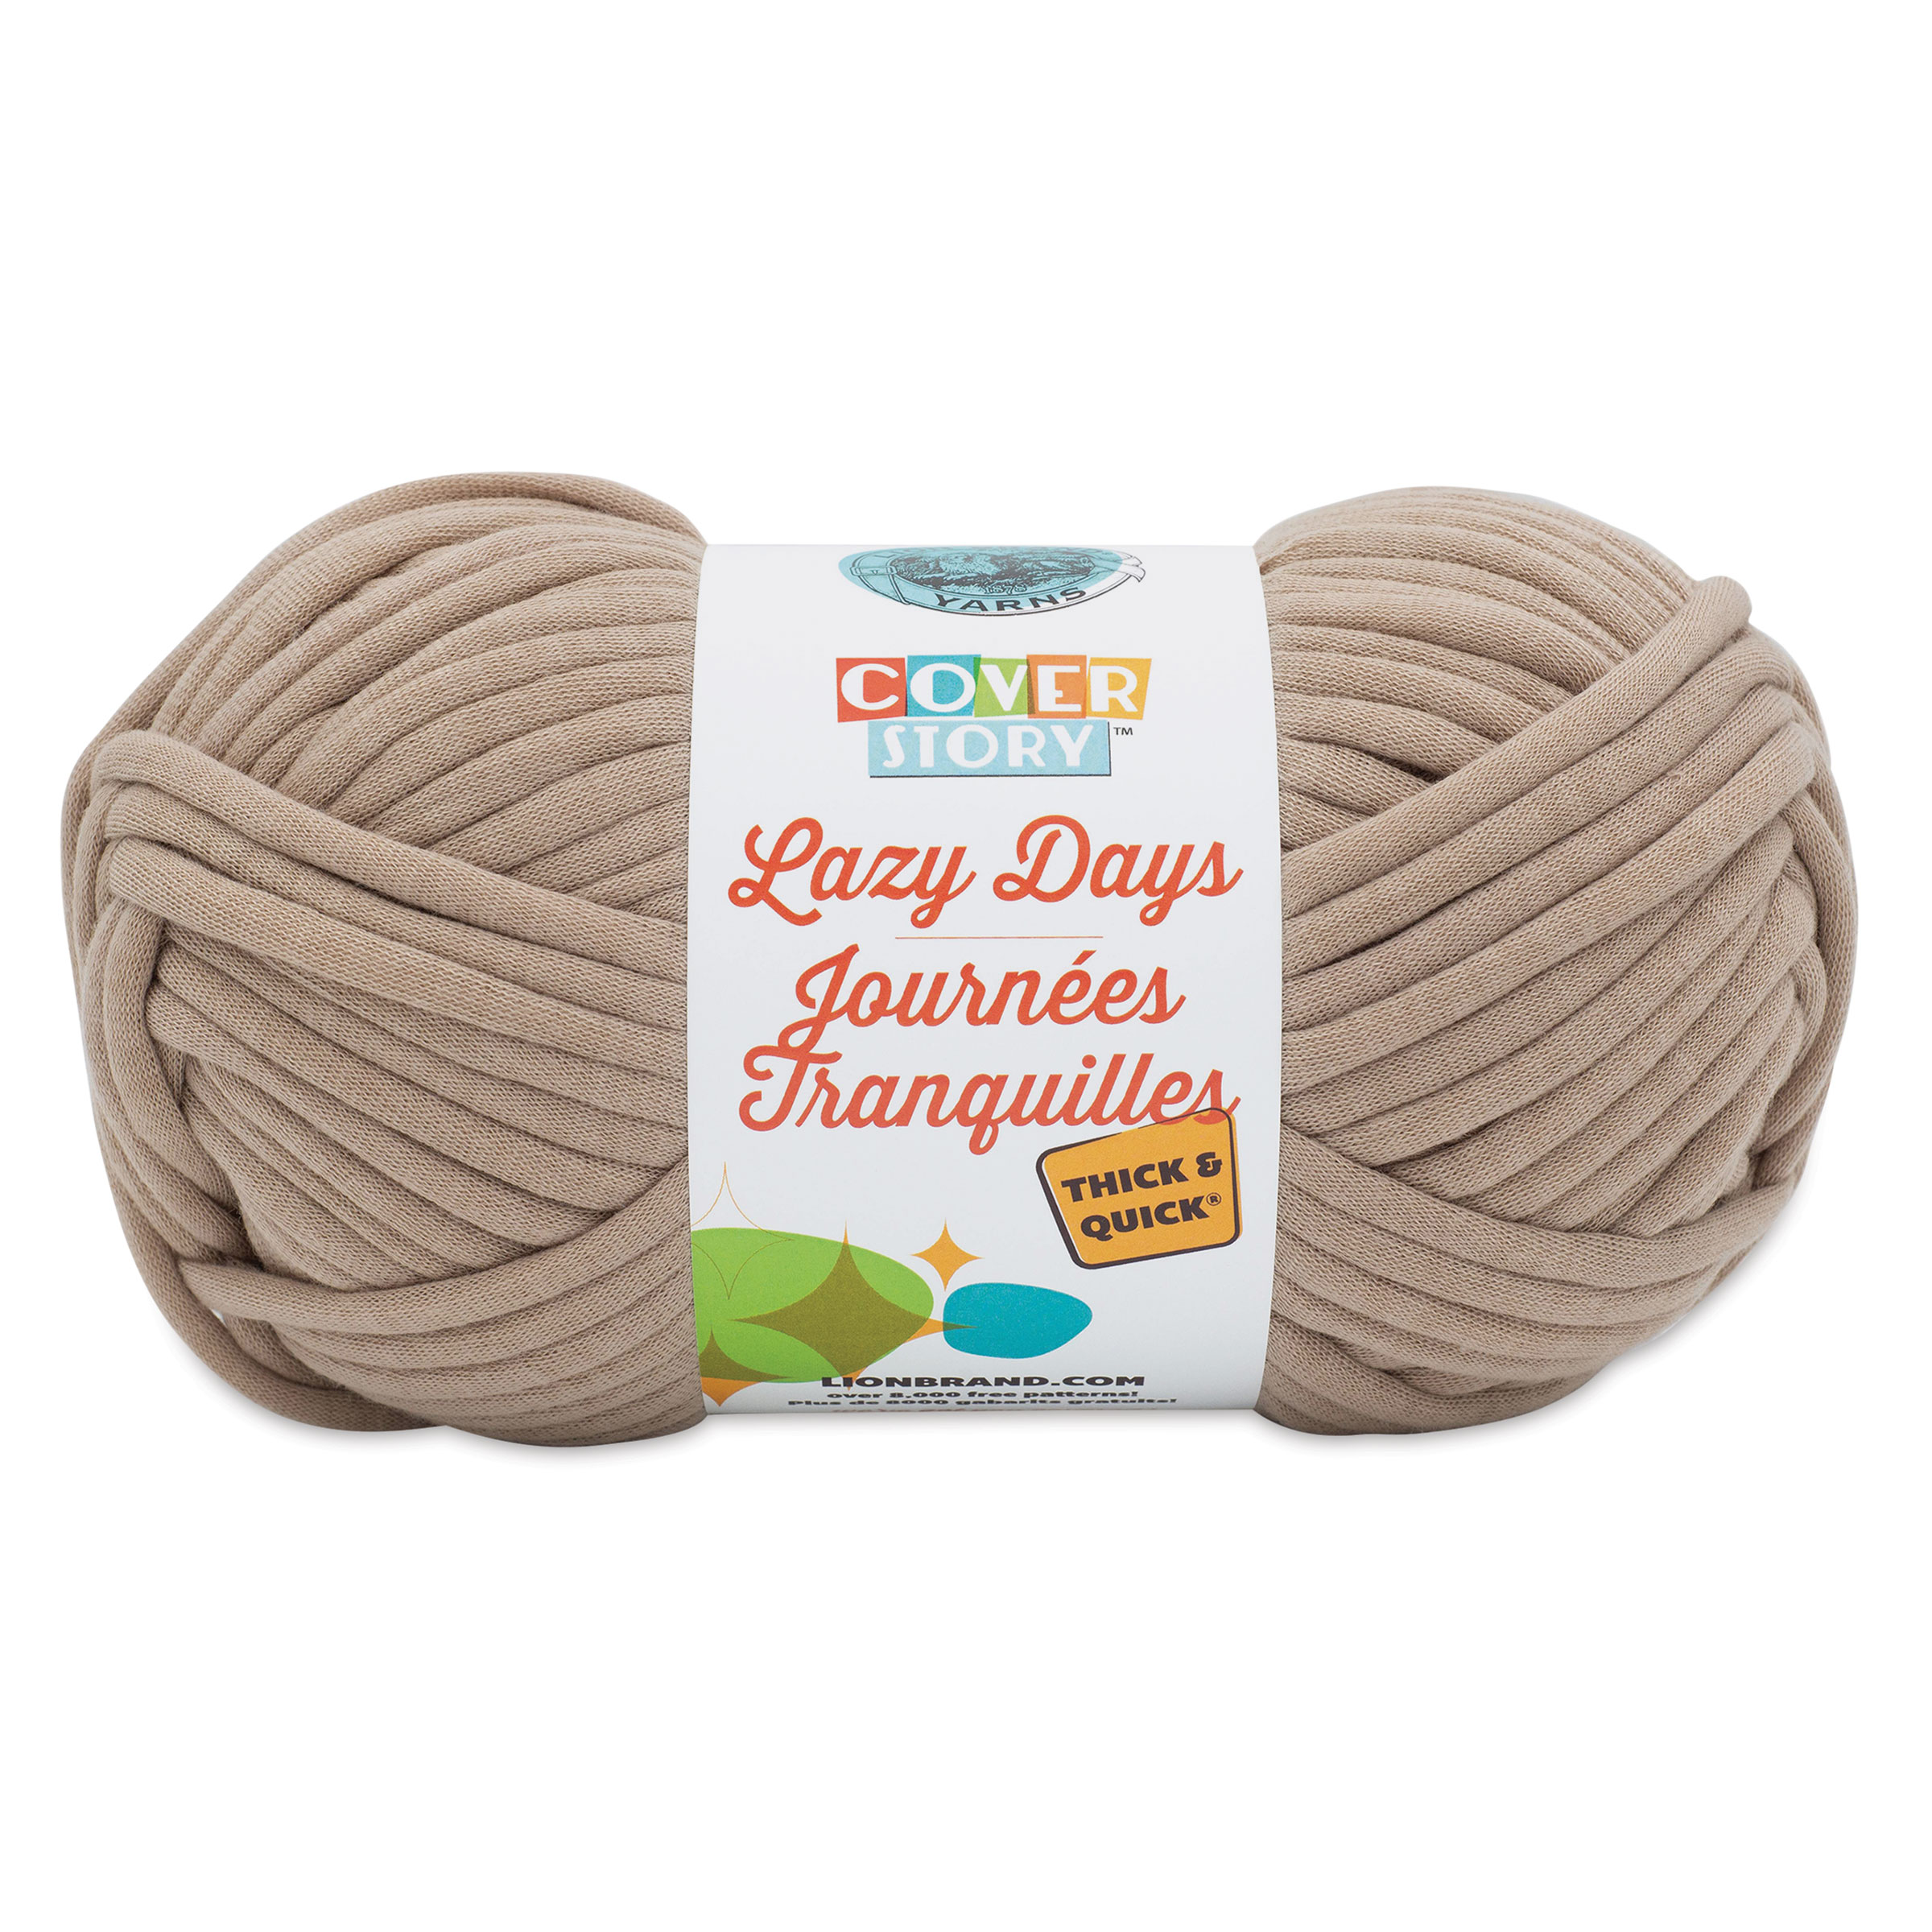 Lion Brand Cover Story Thick & Quick Yarn - Arctic, 39 Yards